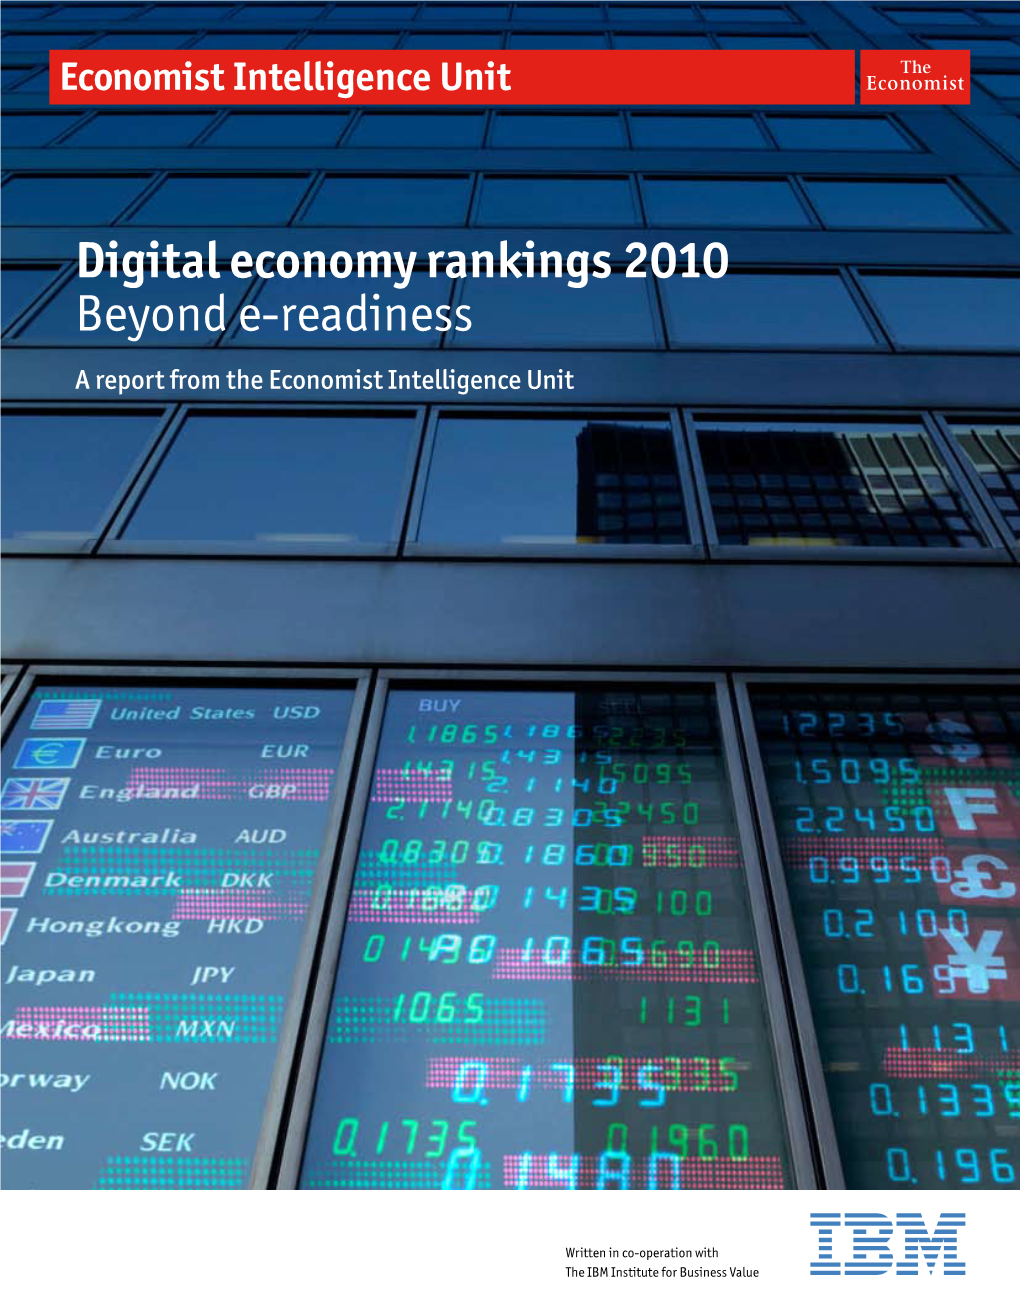 Digital Economy Rankings 2010 Beyond E-Readiness a Report from the Economist Intelligence Unit